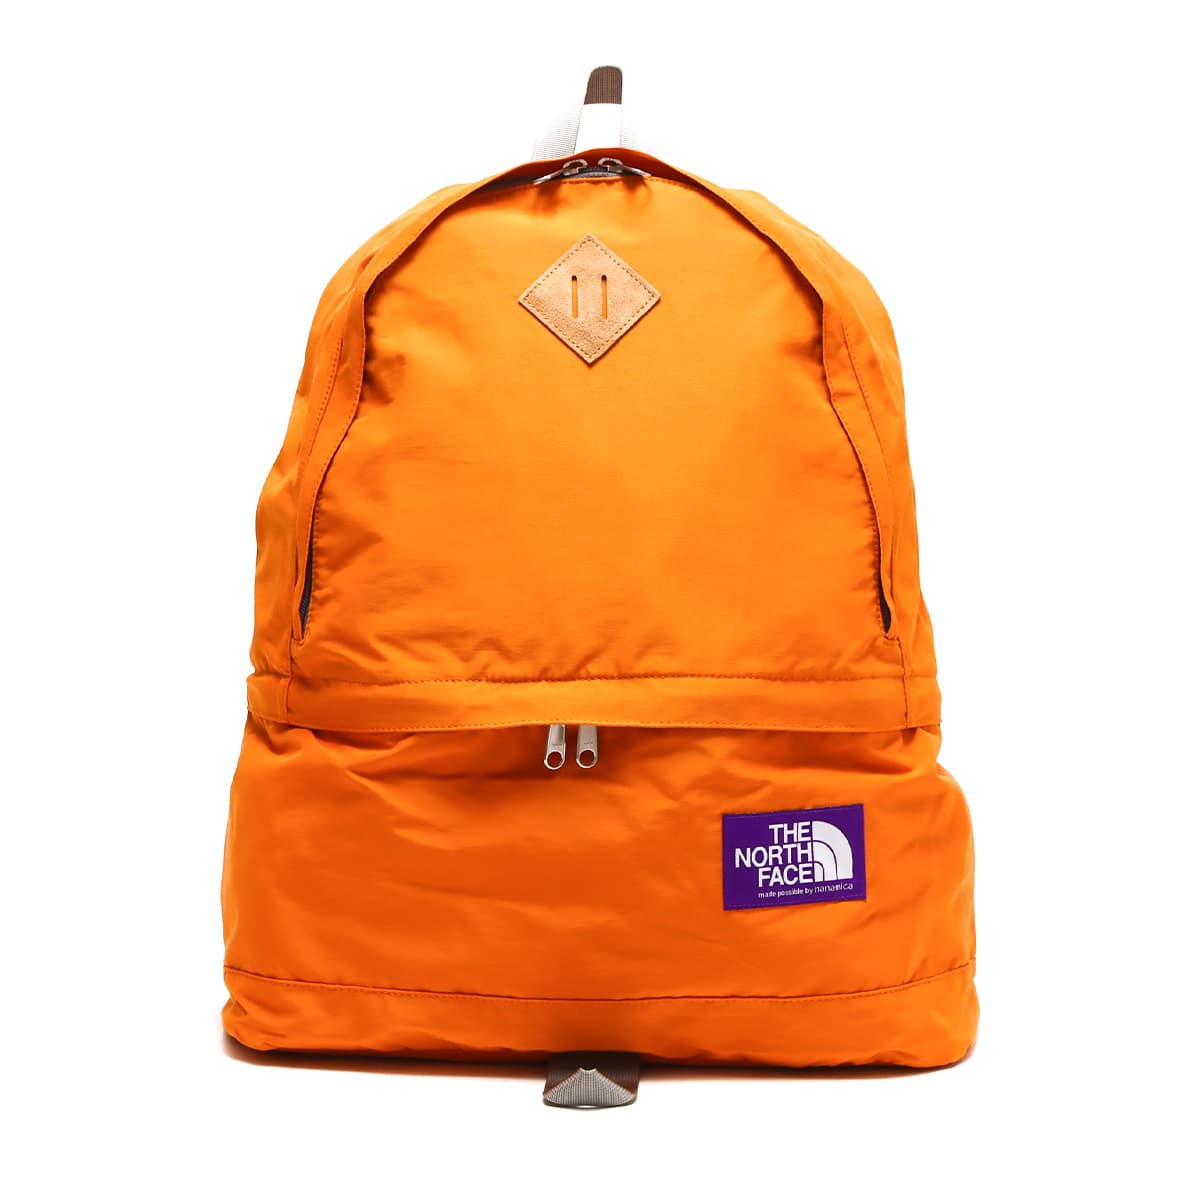 THE NORTH FACE PURPLE LABEL Field Day Pack Orange 22FW-I